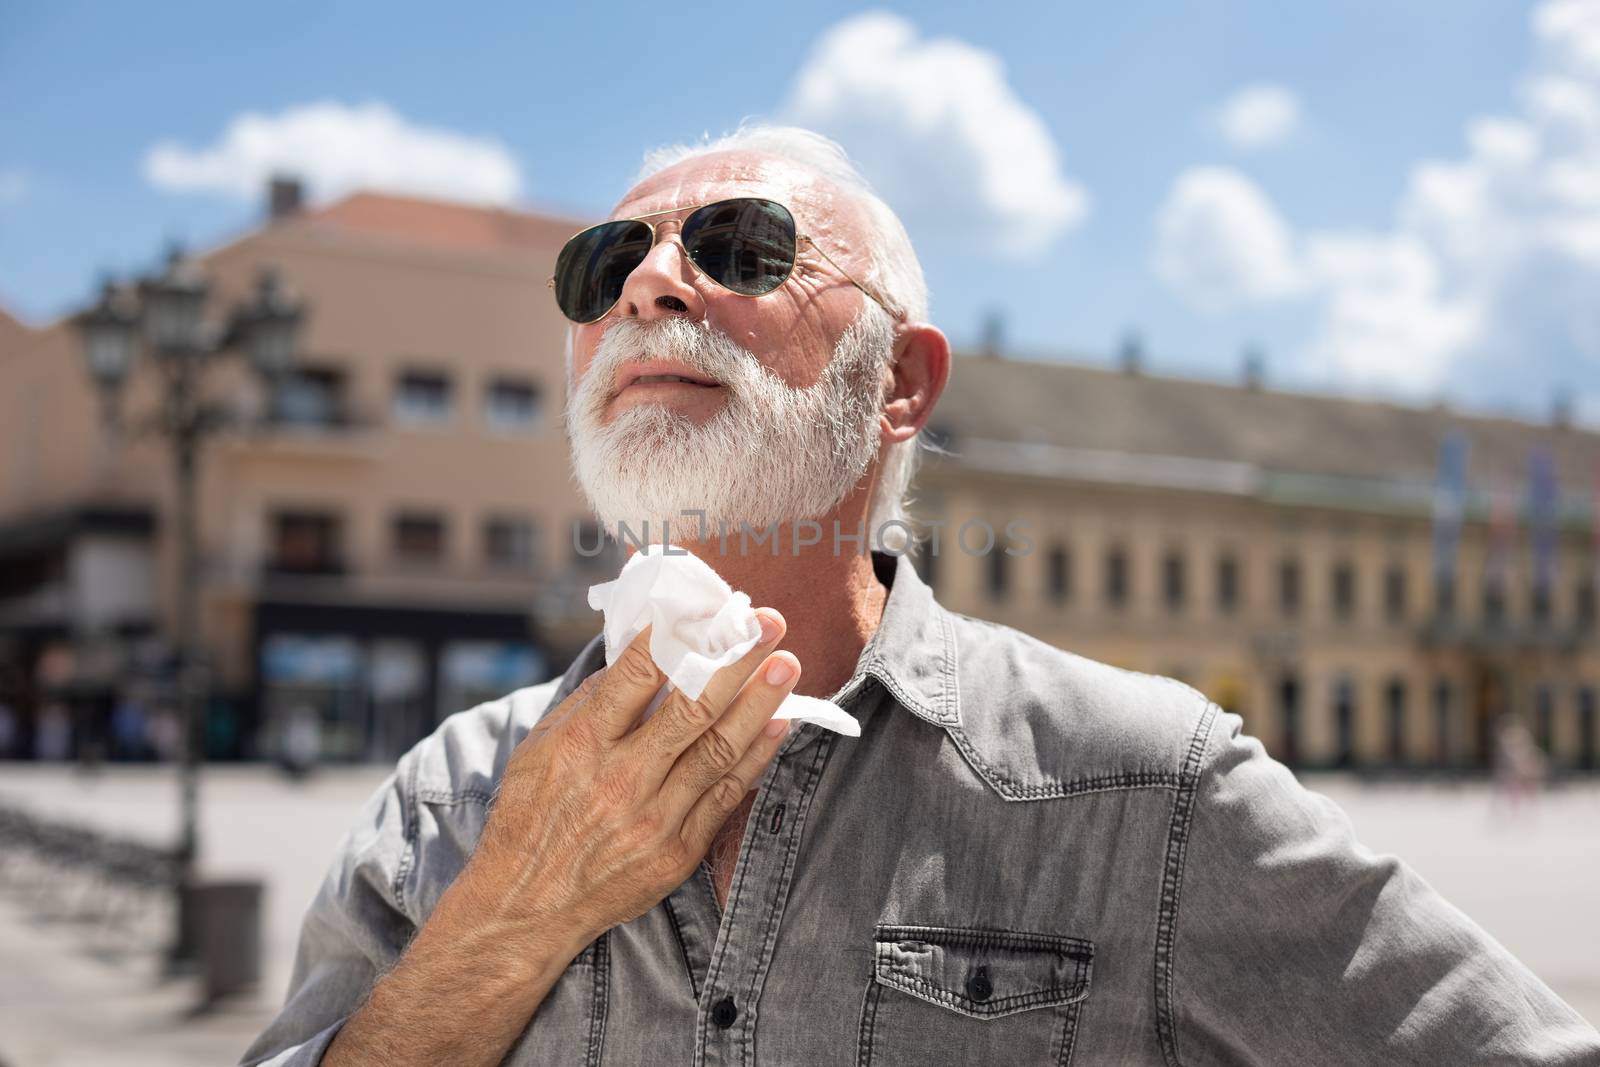 Old man cleaning neck and sweat with wet wipes outdoor on hot su by adamr